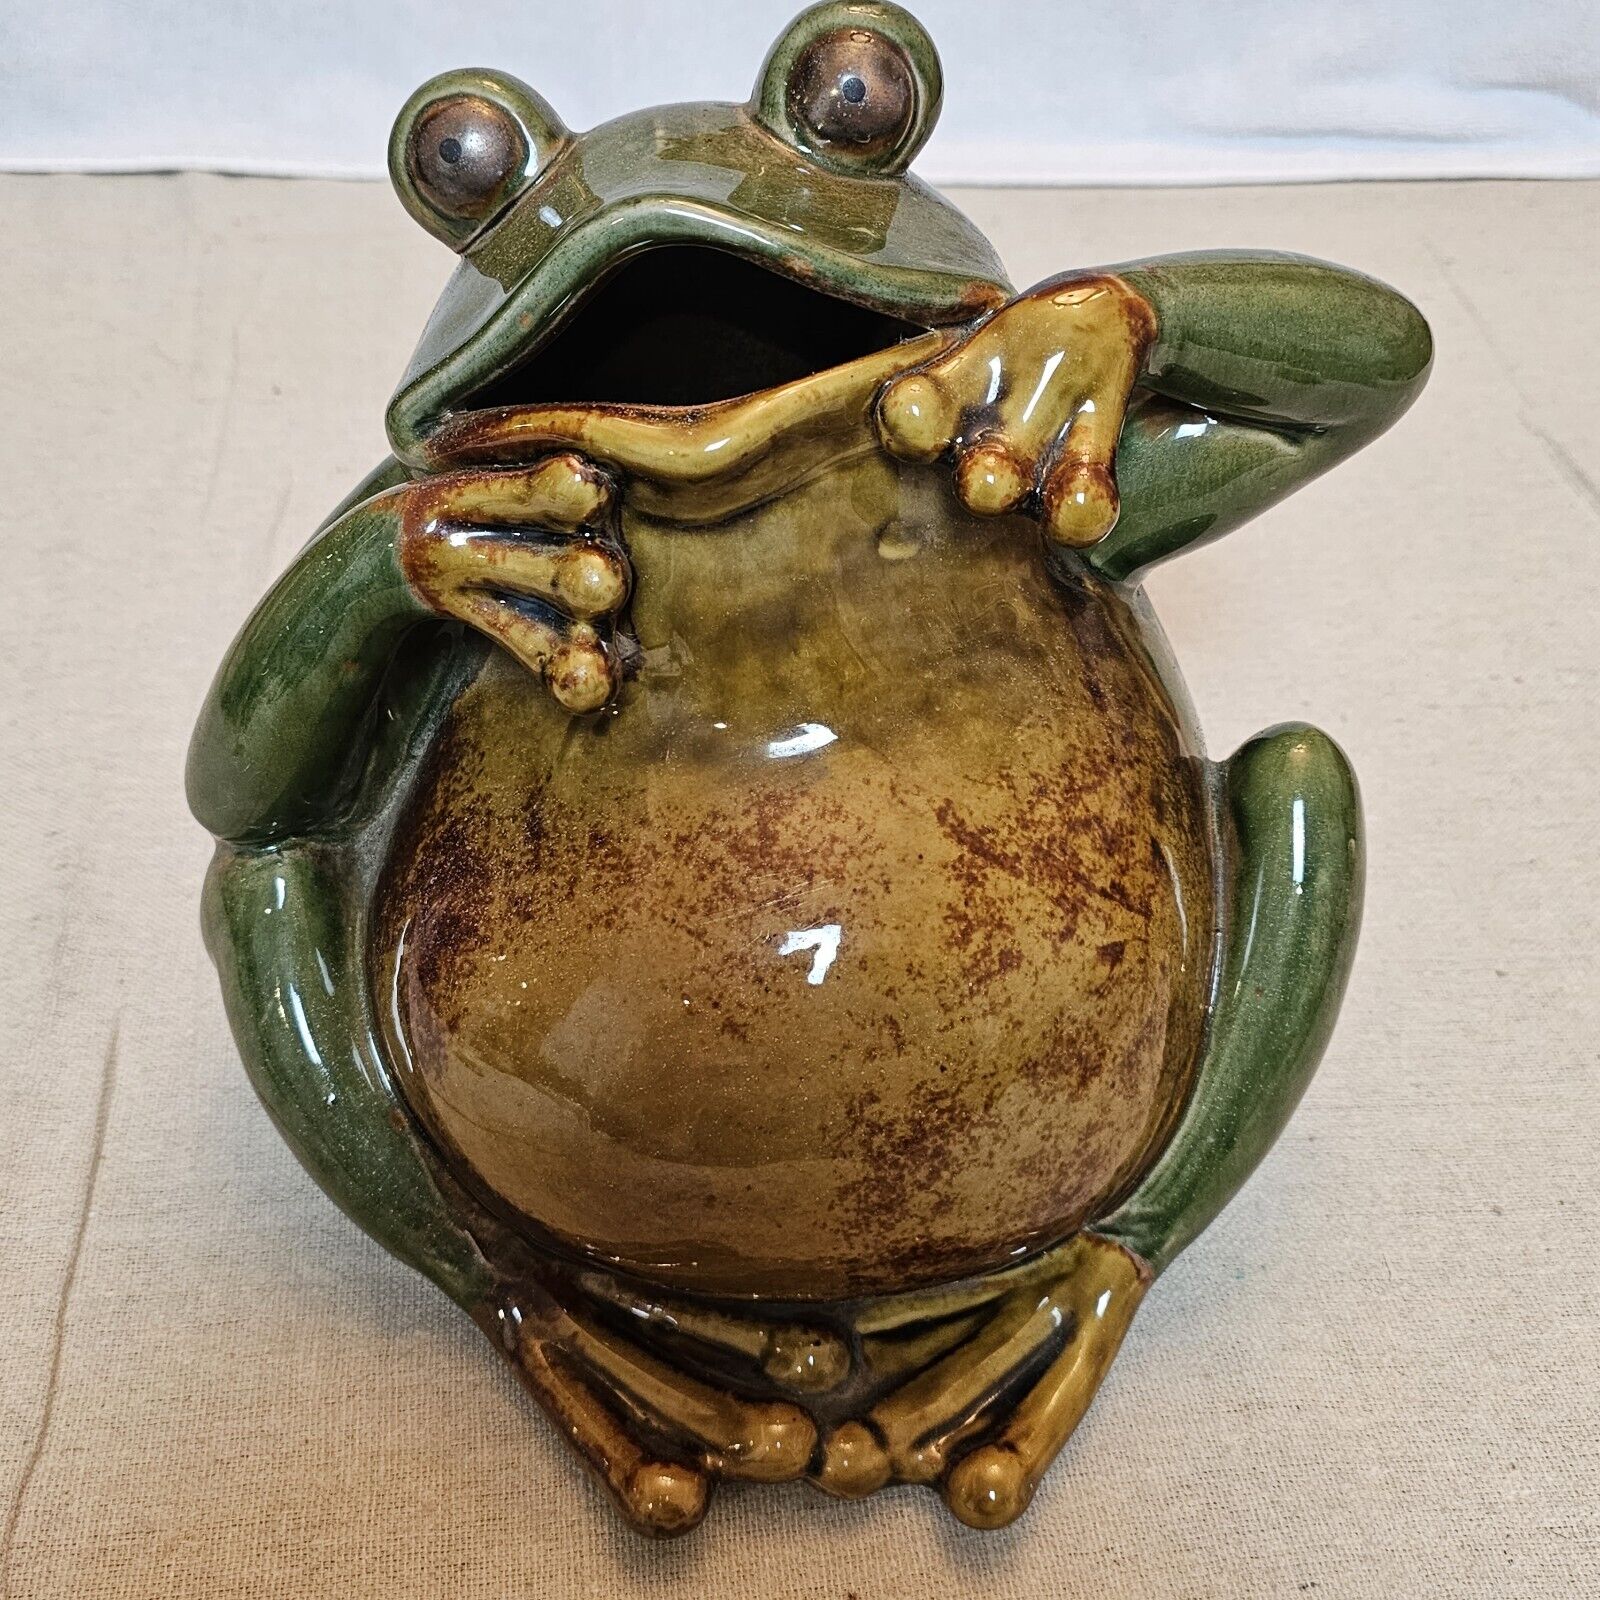 9” Tall Vintage Large Ceramic Glossy Frog Toad Green Decor Figurine Porch Decor 